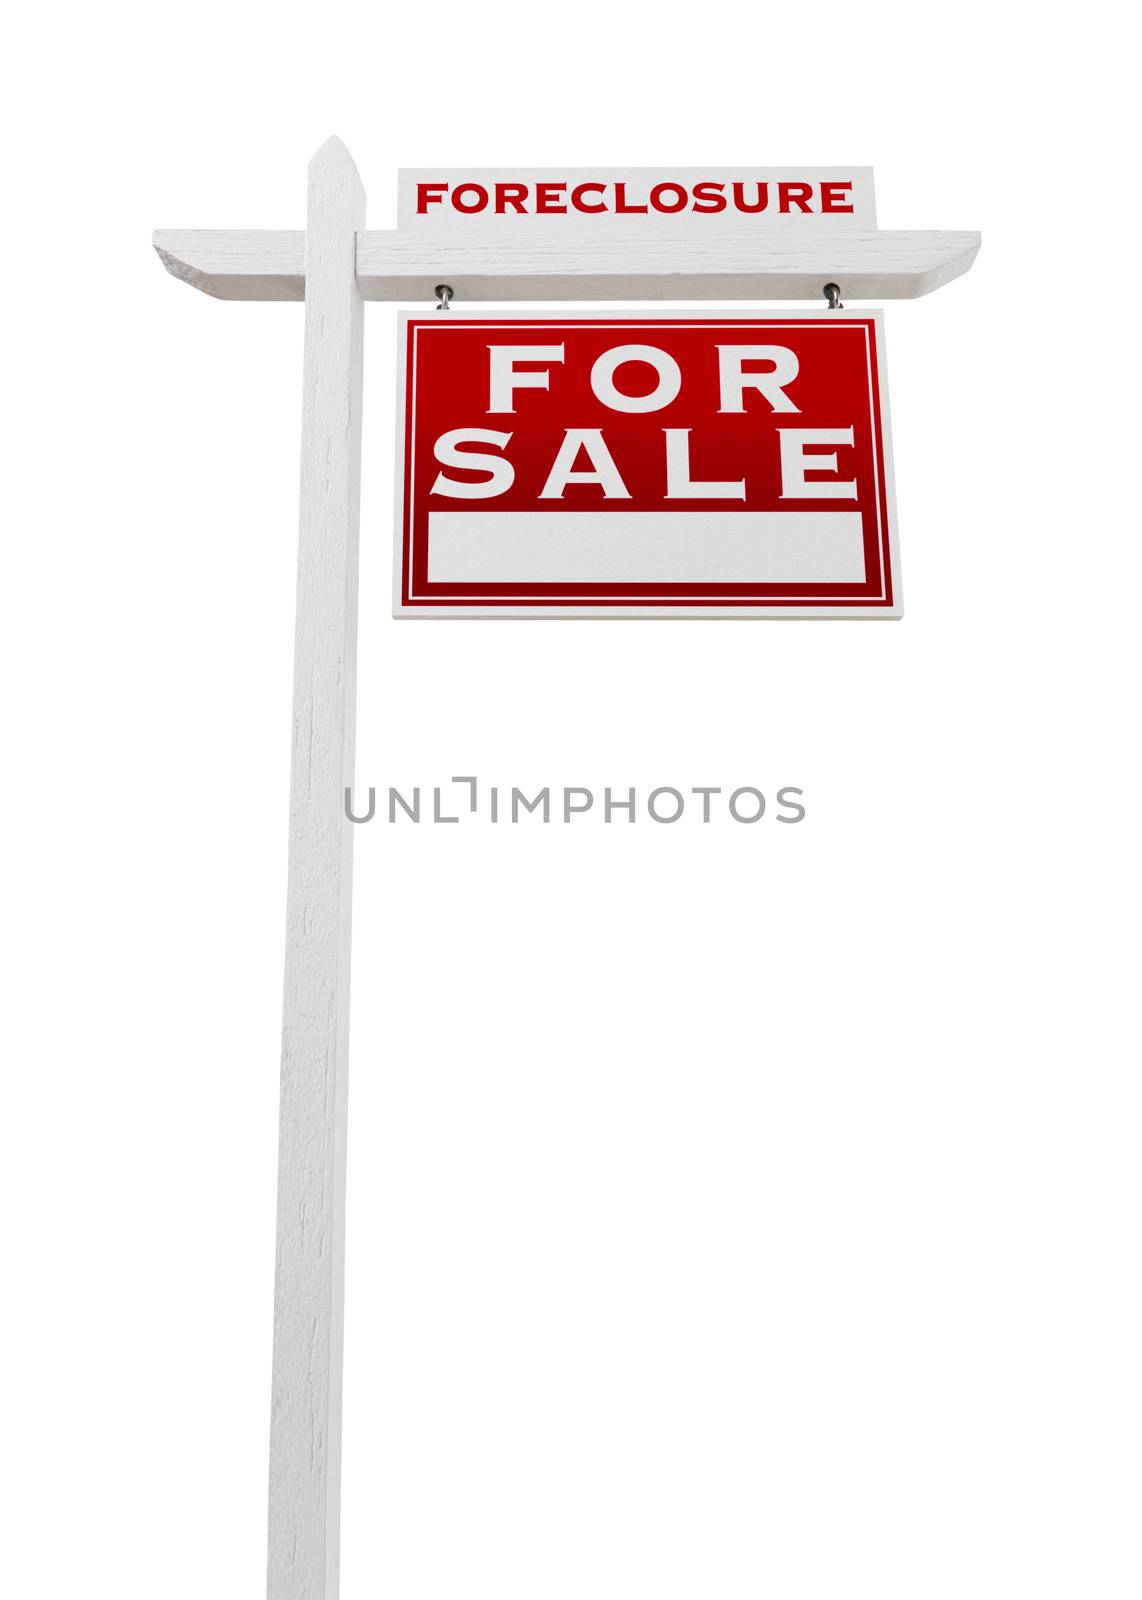 Right Facing Foreclosure Sold For Sale Real Estate Sign Isolated by Feverpitched